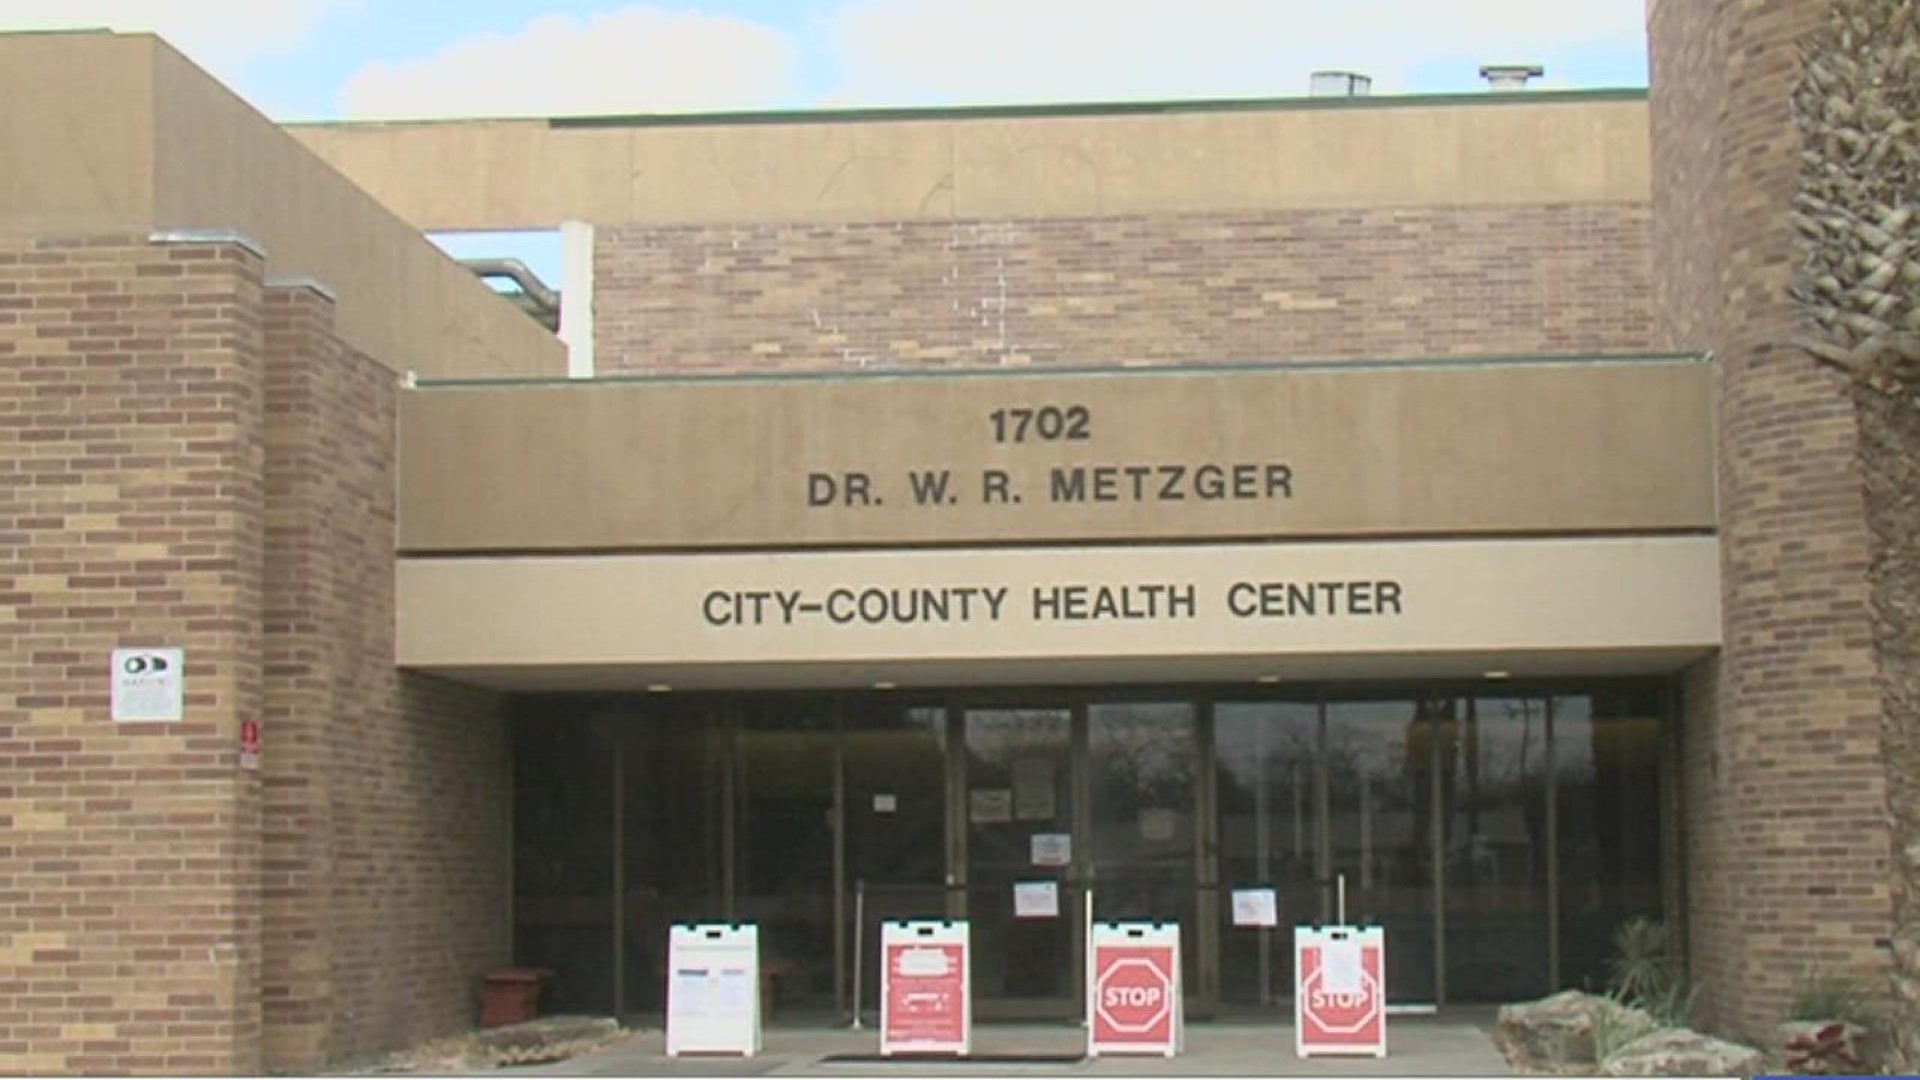 According to City Manager Peter Zanoni, the City would be in charge of the health districts day-to-day operations.